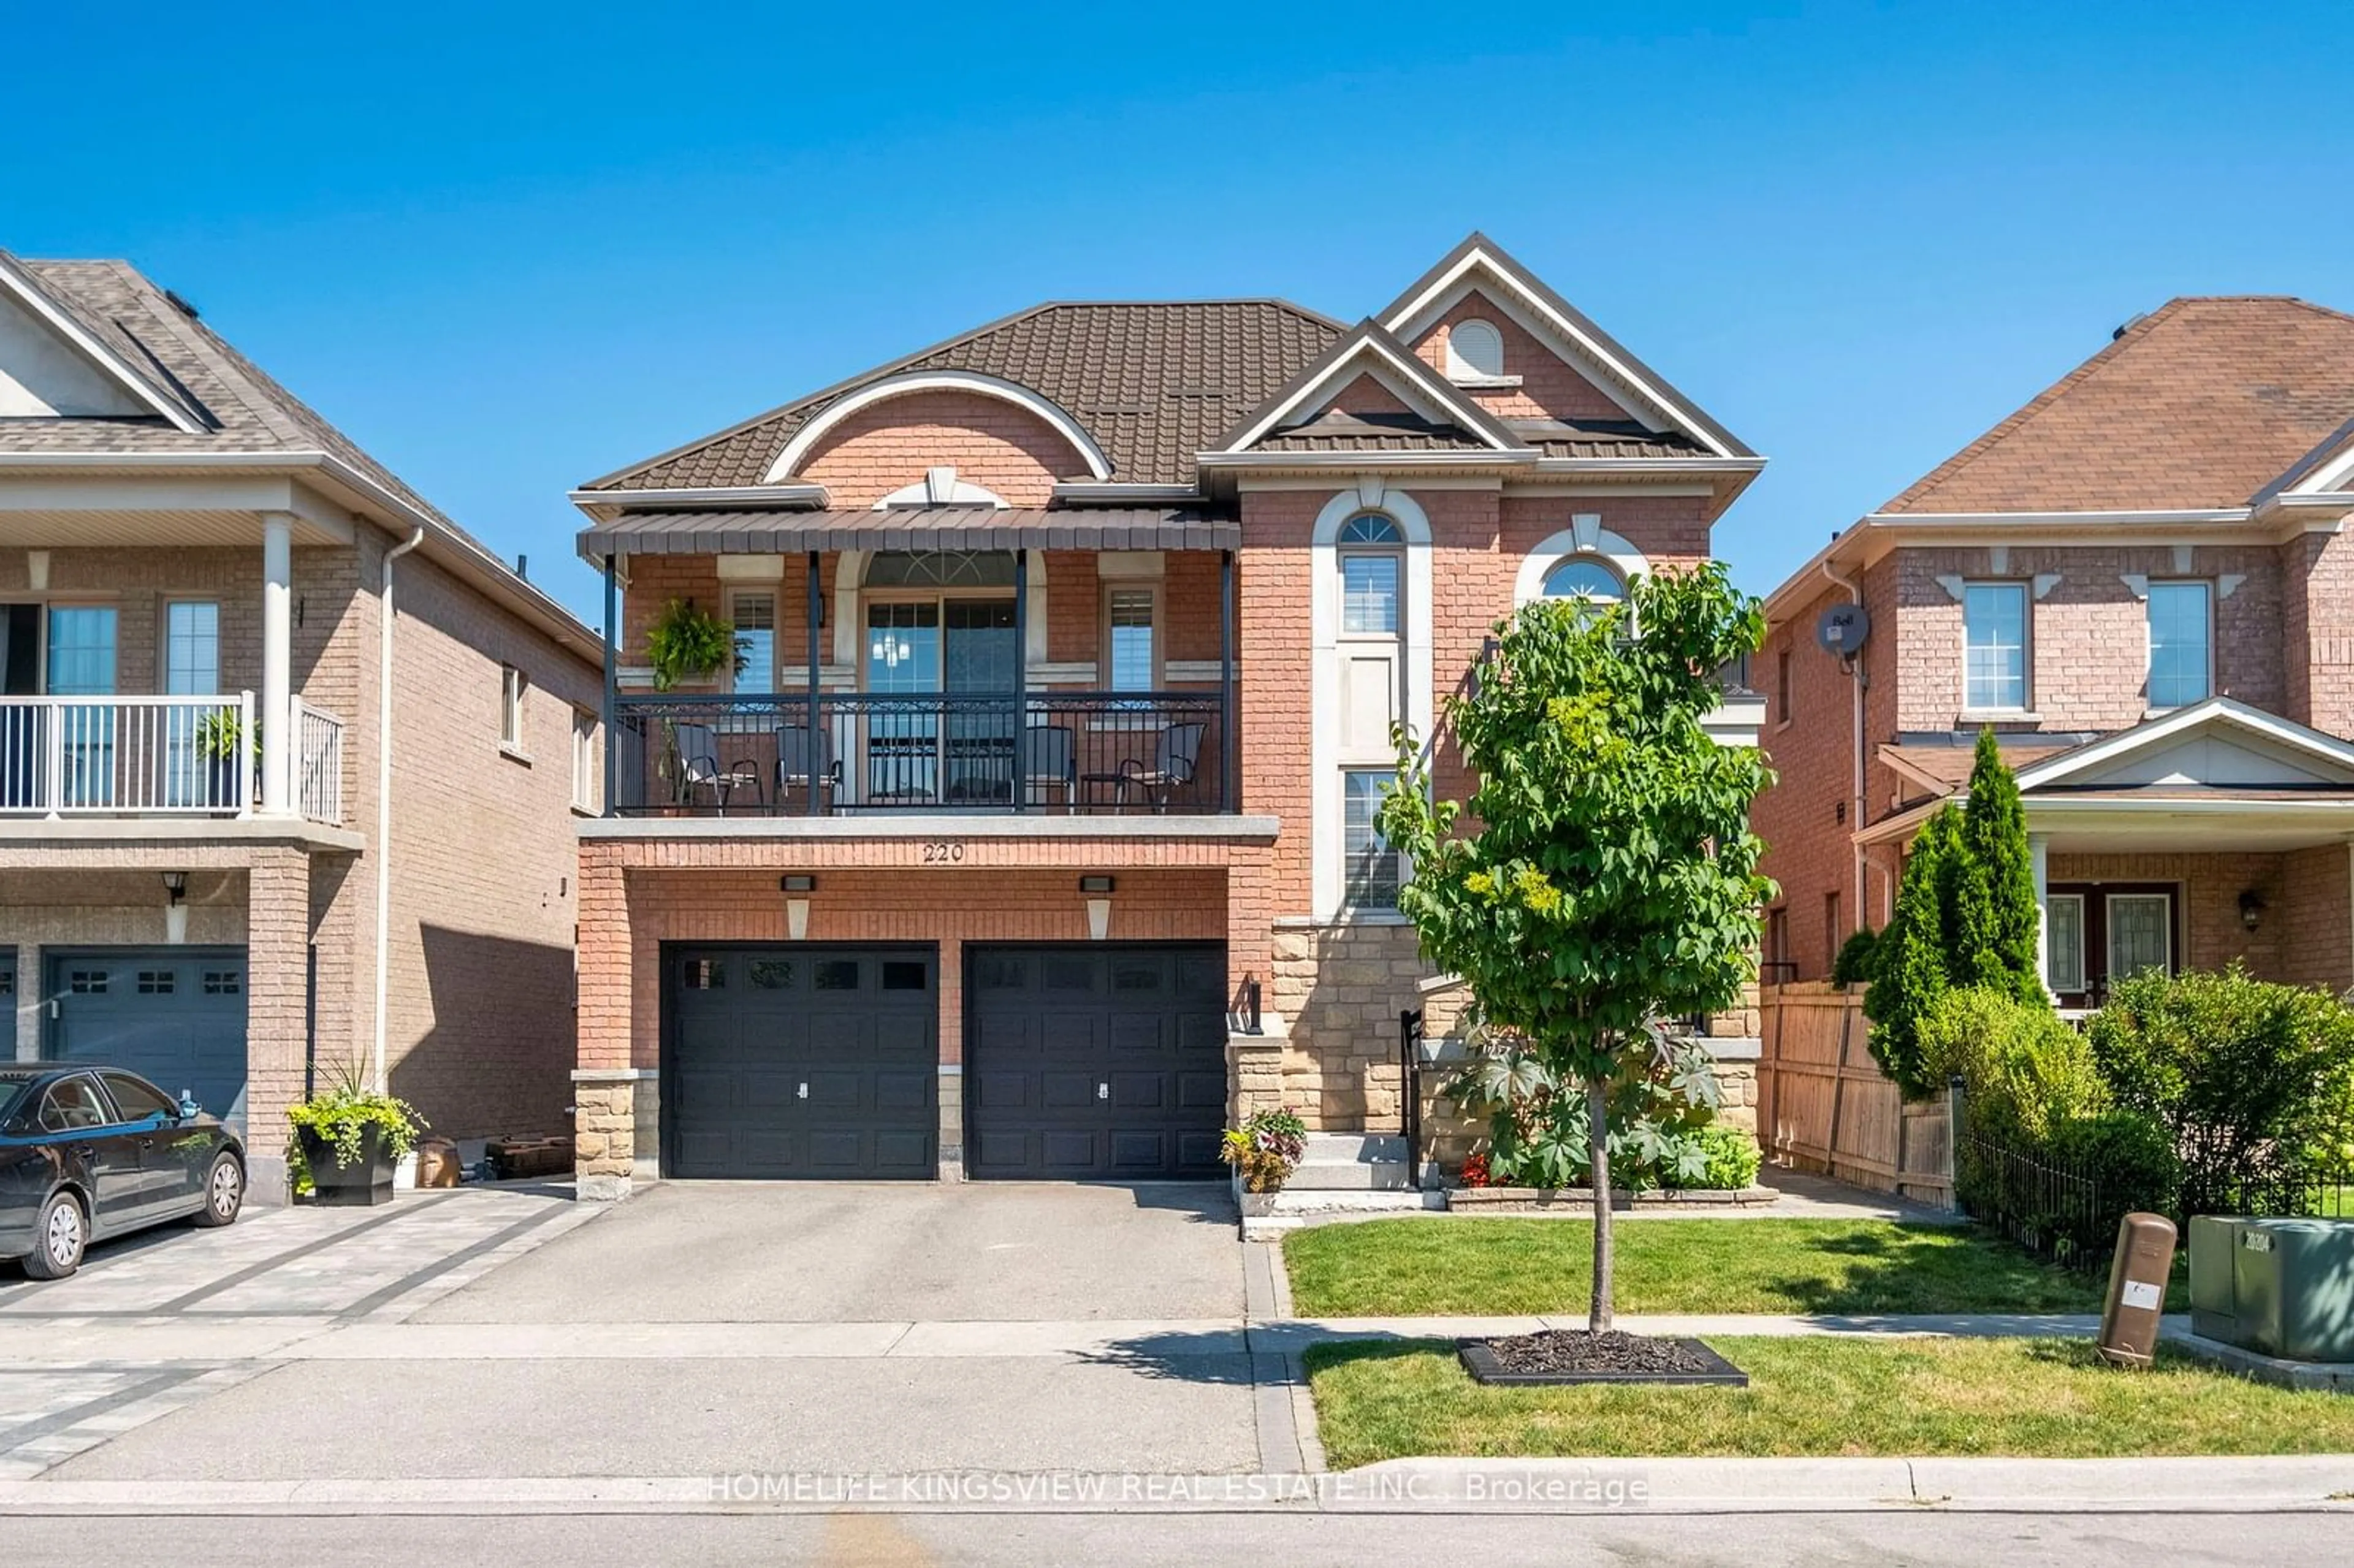 Home with brick exterior material for 220 Peak Point Blvd, Vaughan Ontario L6A 0B4